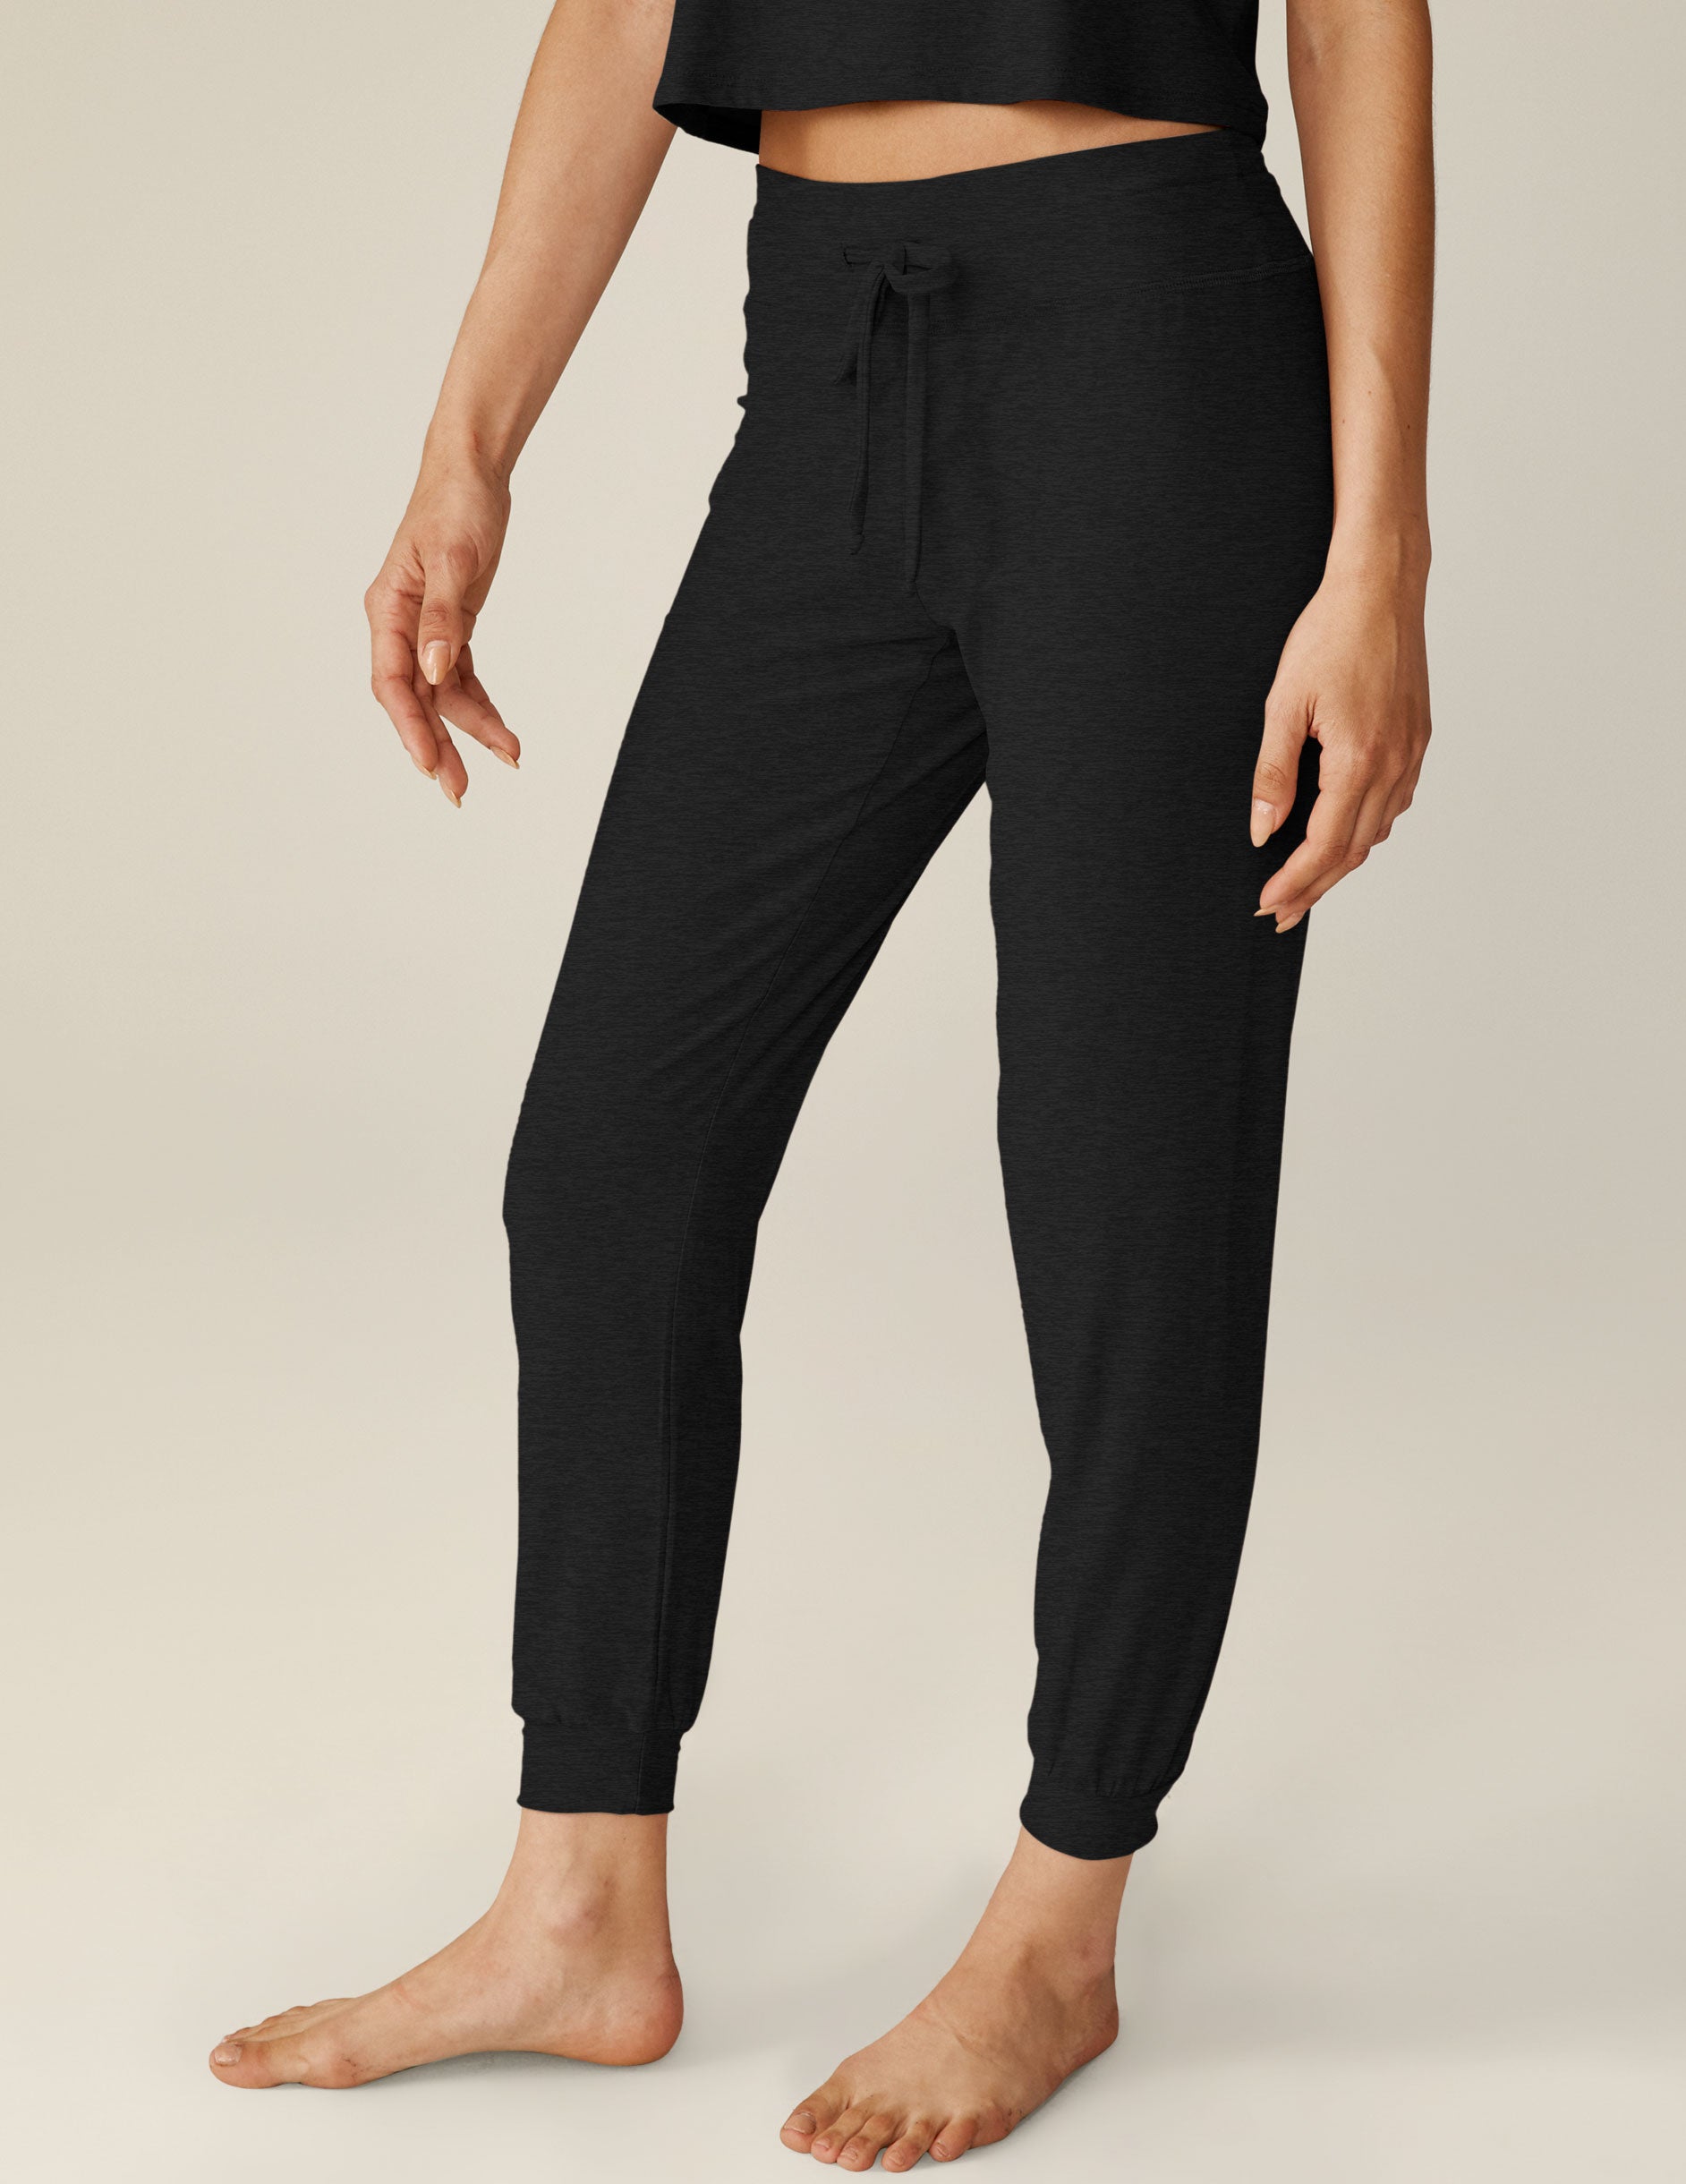 Hat and Beyond Women's Lounge Around Joggers Skinny Yoga Fit 